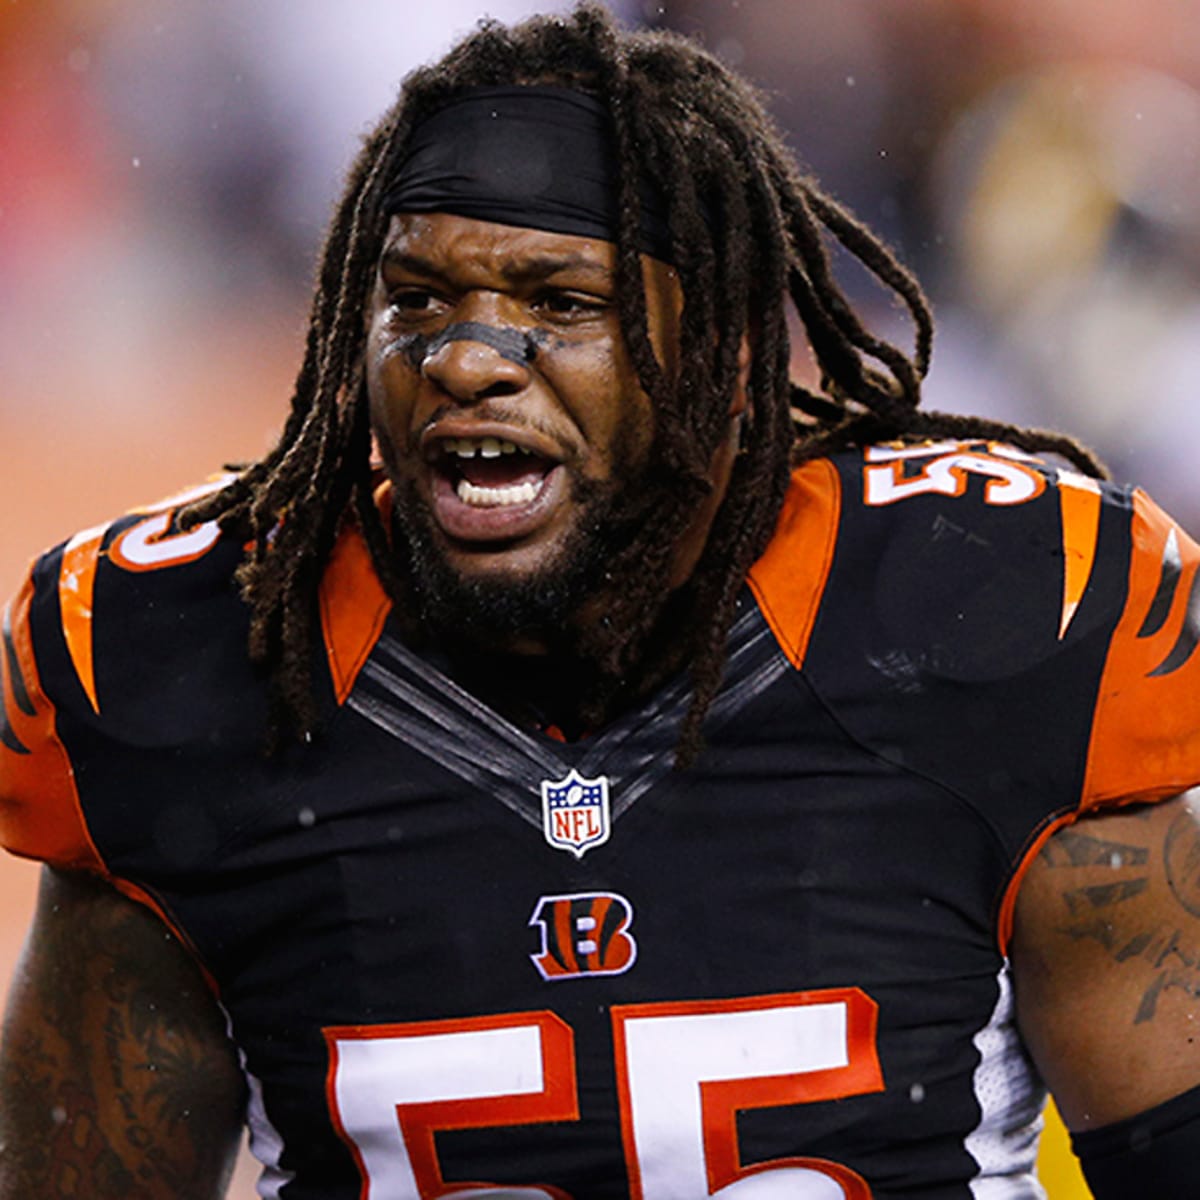 Vontaze Burfict on the Steelers, Bengals poise - Sports Illustrated